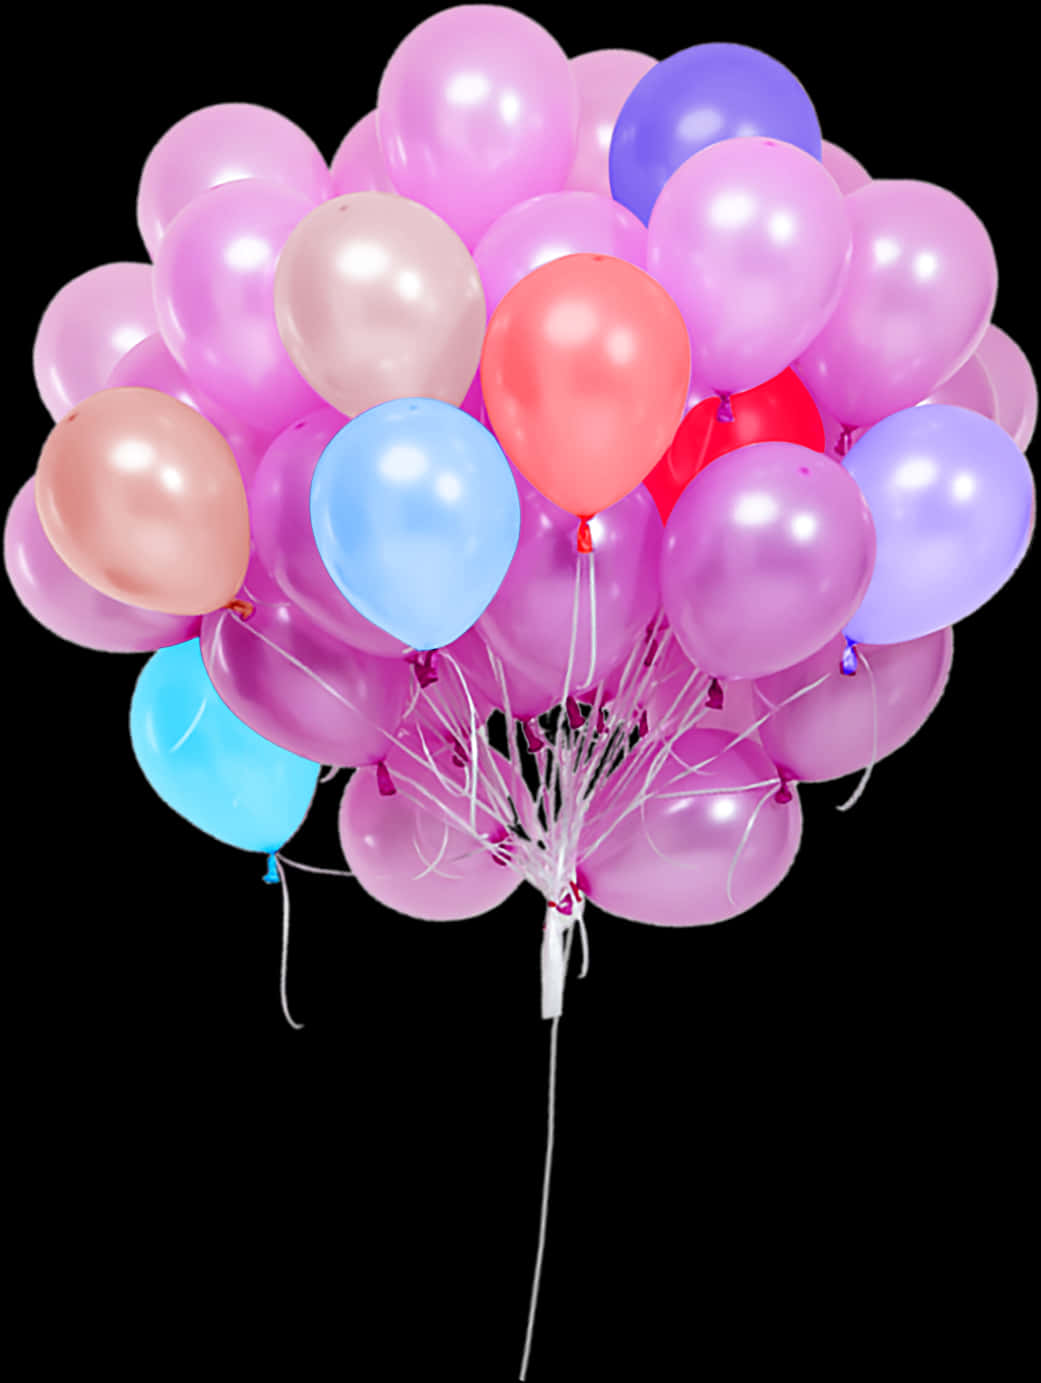 A Bunch Of Balloons On A Black Background